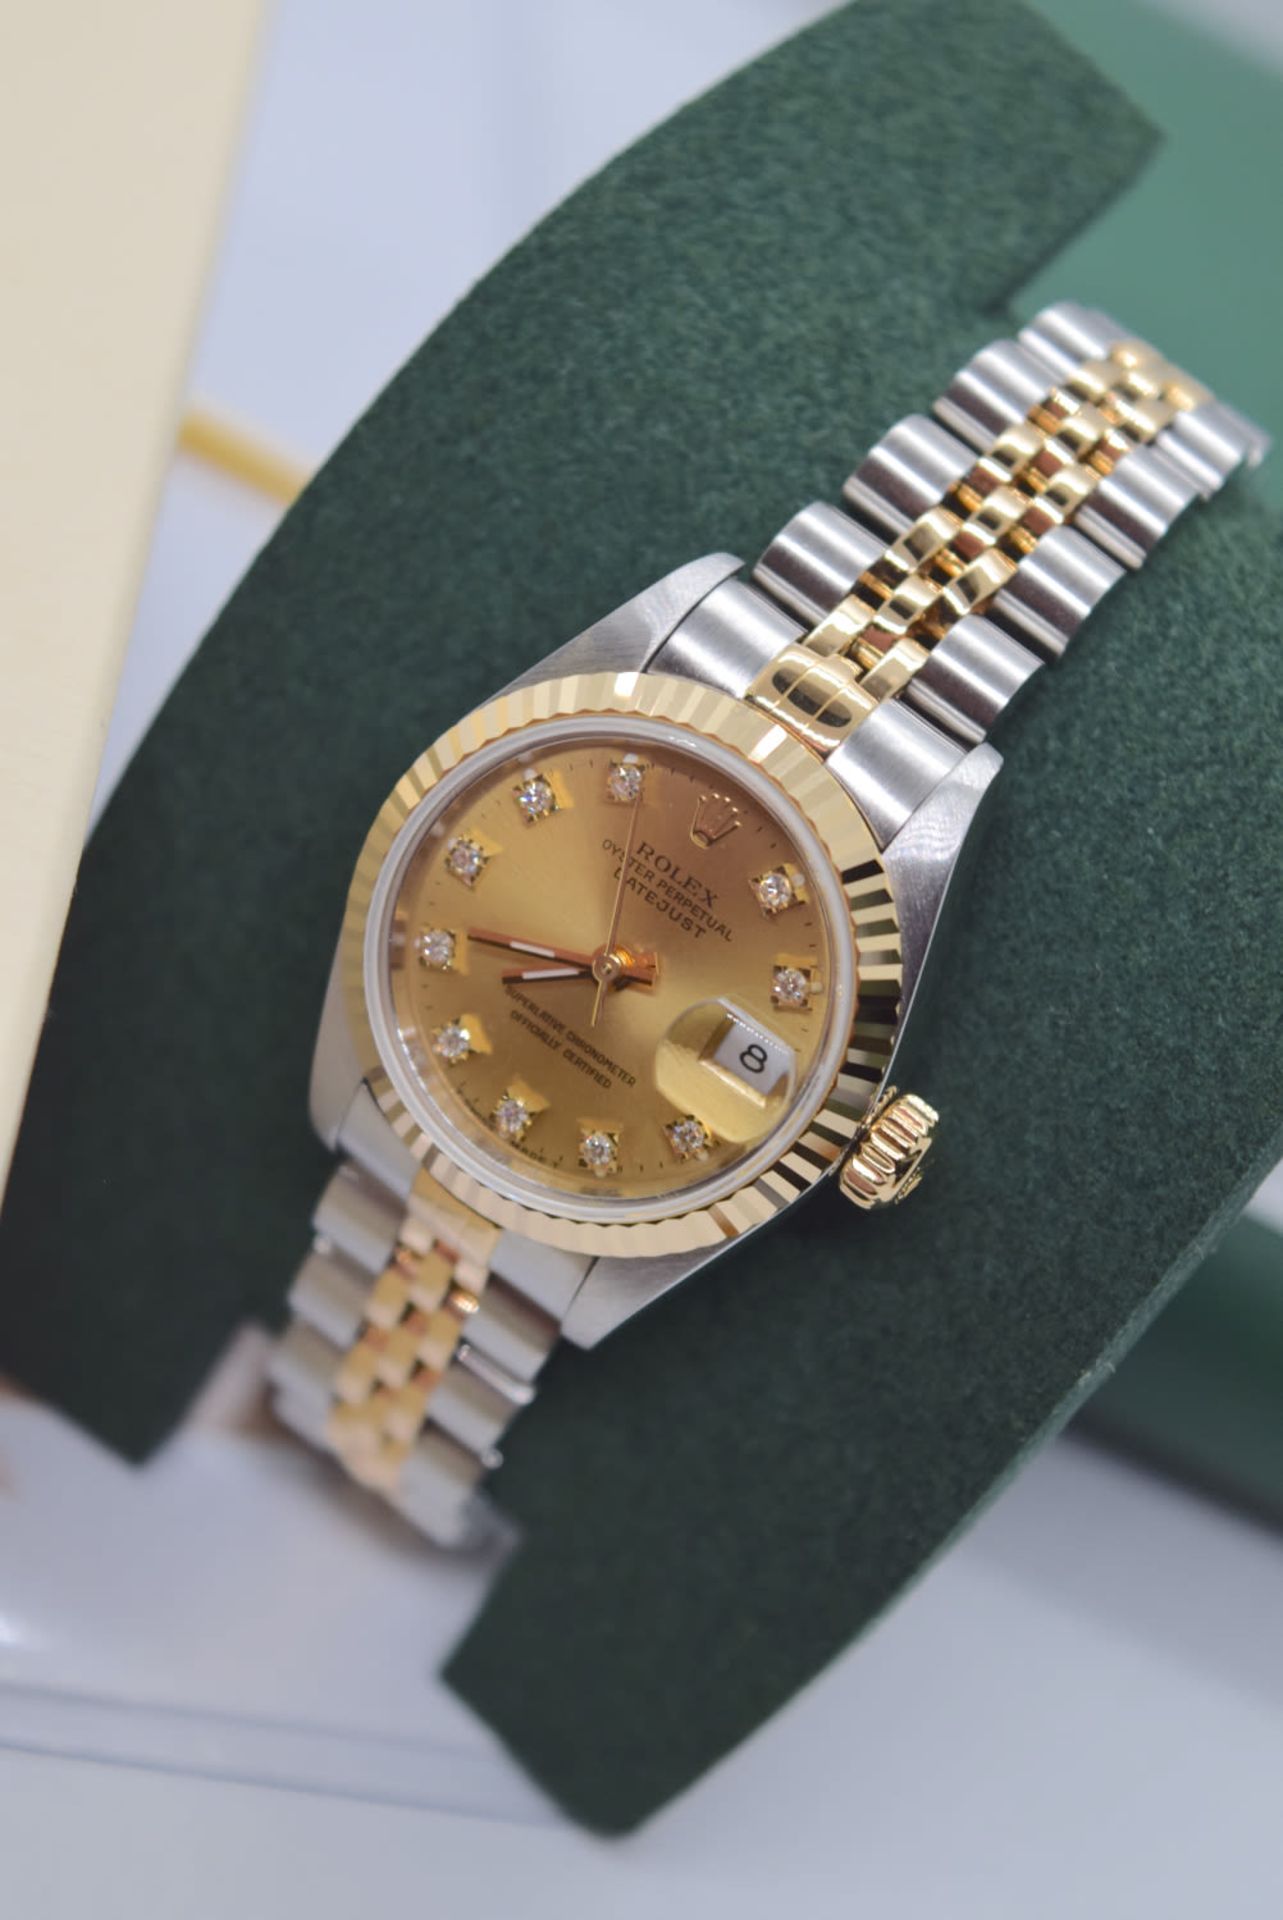 *DIAMOND* ROLEX DATEJUST 18K/ STEEL - FACTORY CHAMPAGNE DIAL *FULL SET/ CERT* £10,550.00 VALUATION - Image 9 of 19